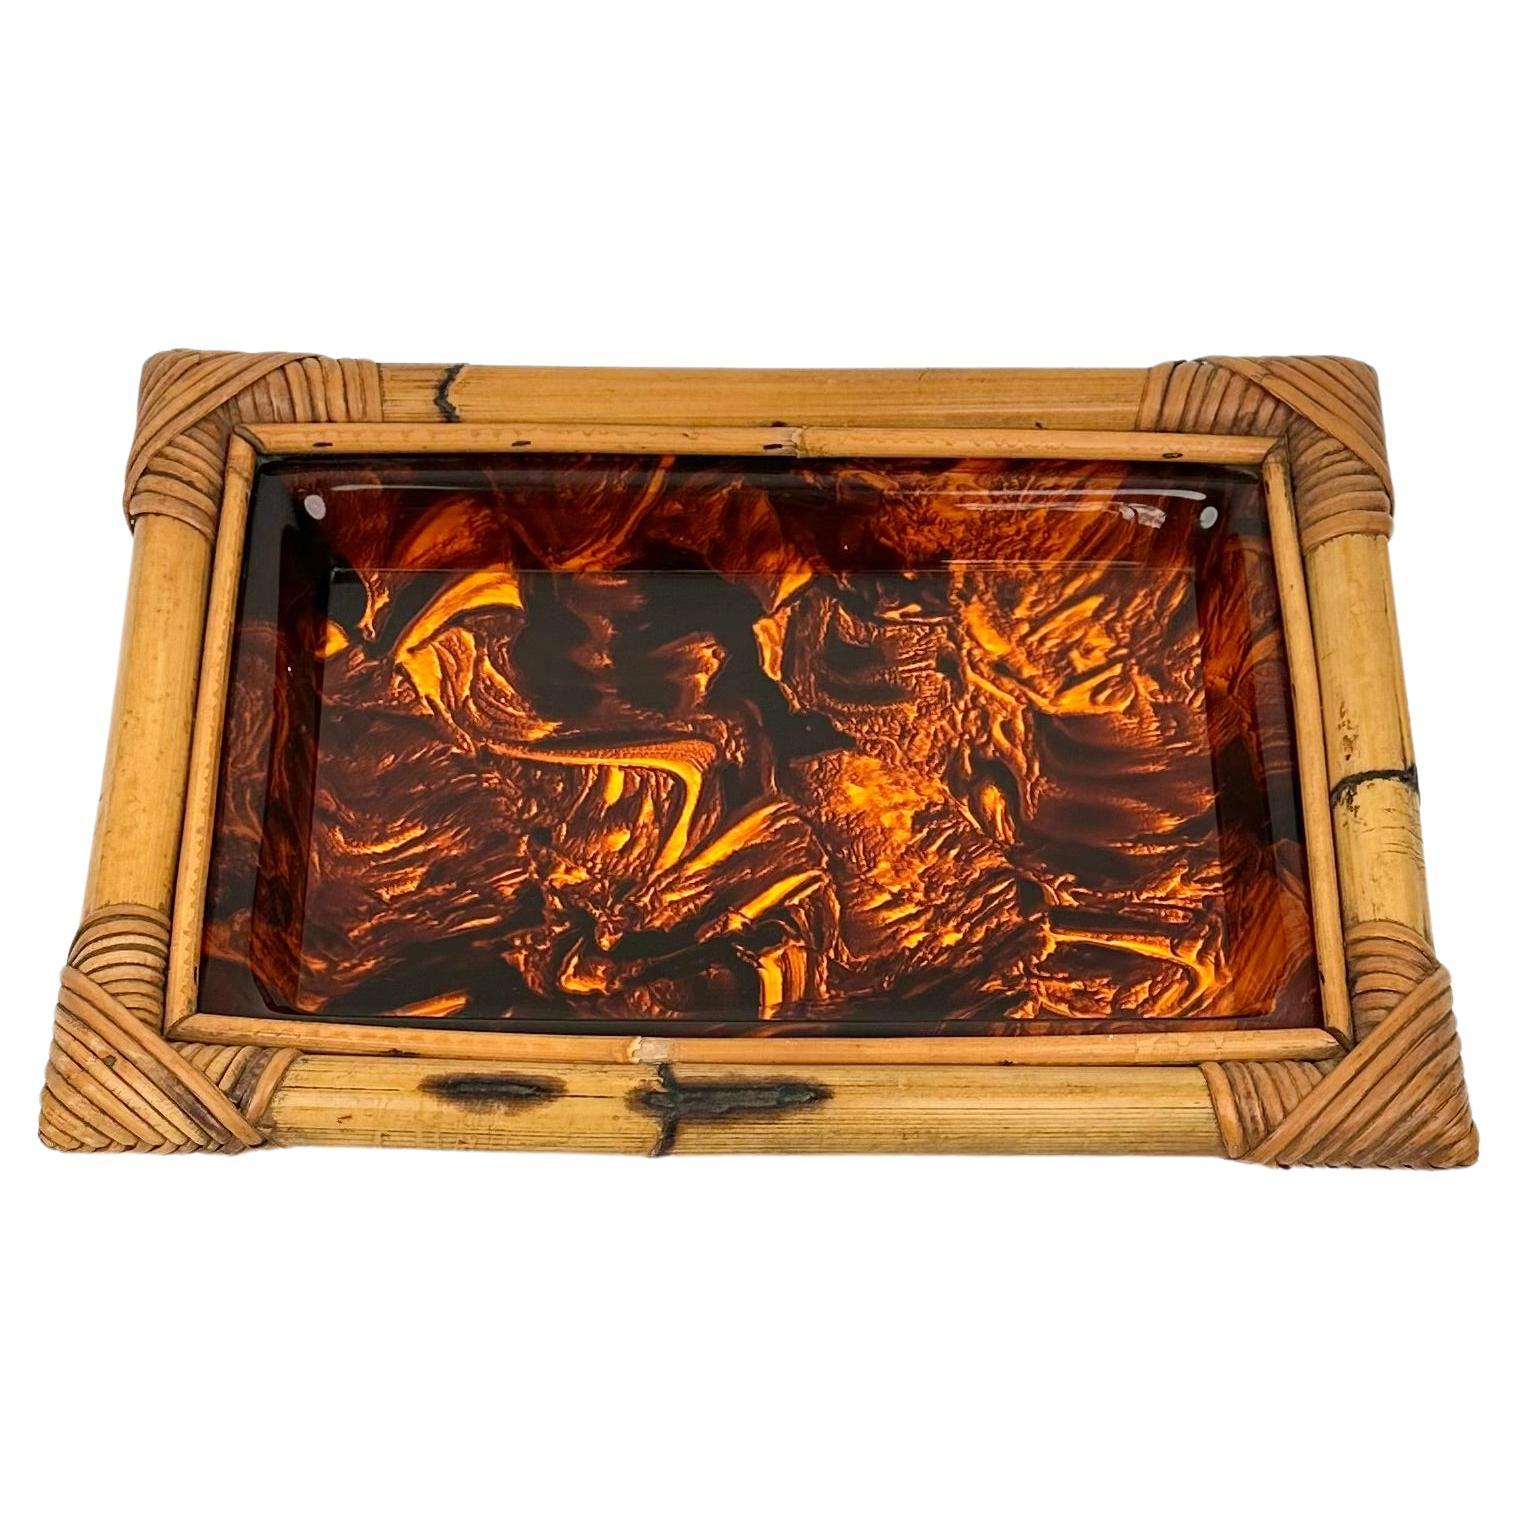 Rectangular serving tray or vide-poche in lucite effect tortoiseshell and Bamboo.

Made in Italy in the 1970s.

